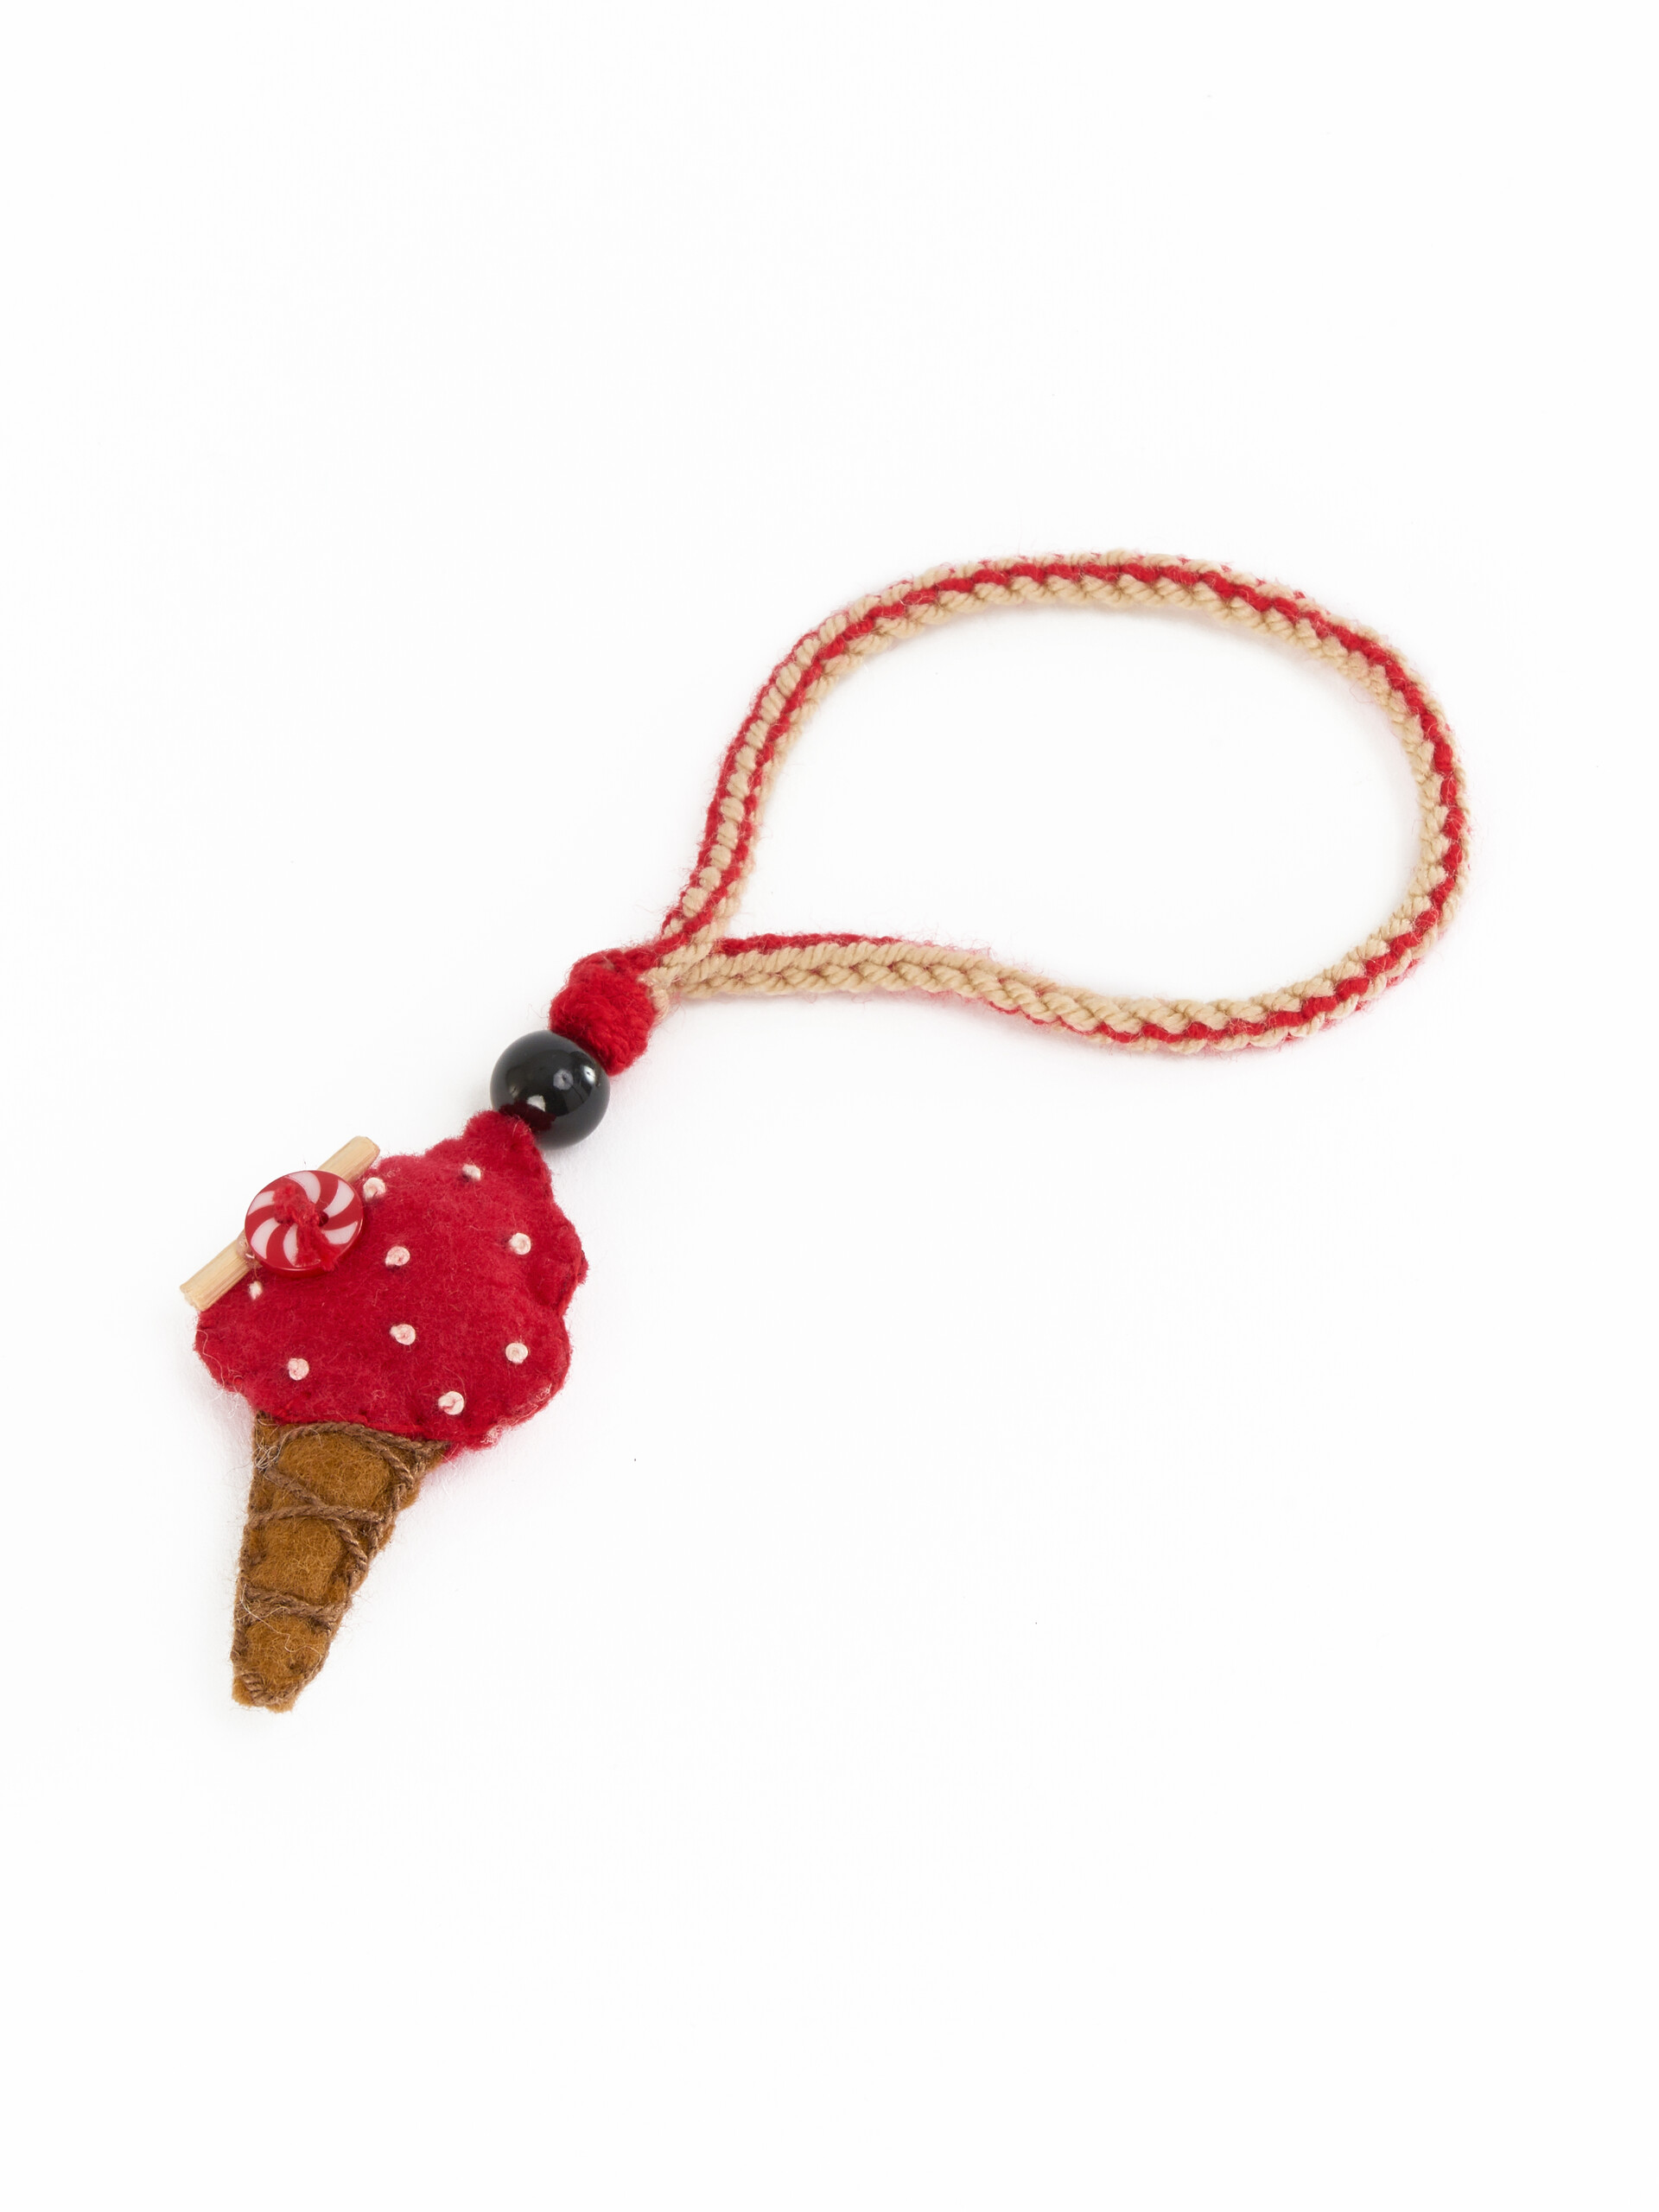 Marni Market Eiscreme-Anhänger in Rot - Accessoires - Image 3